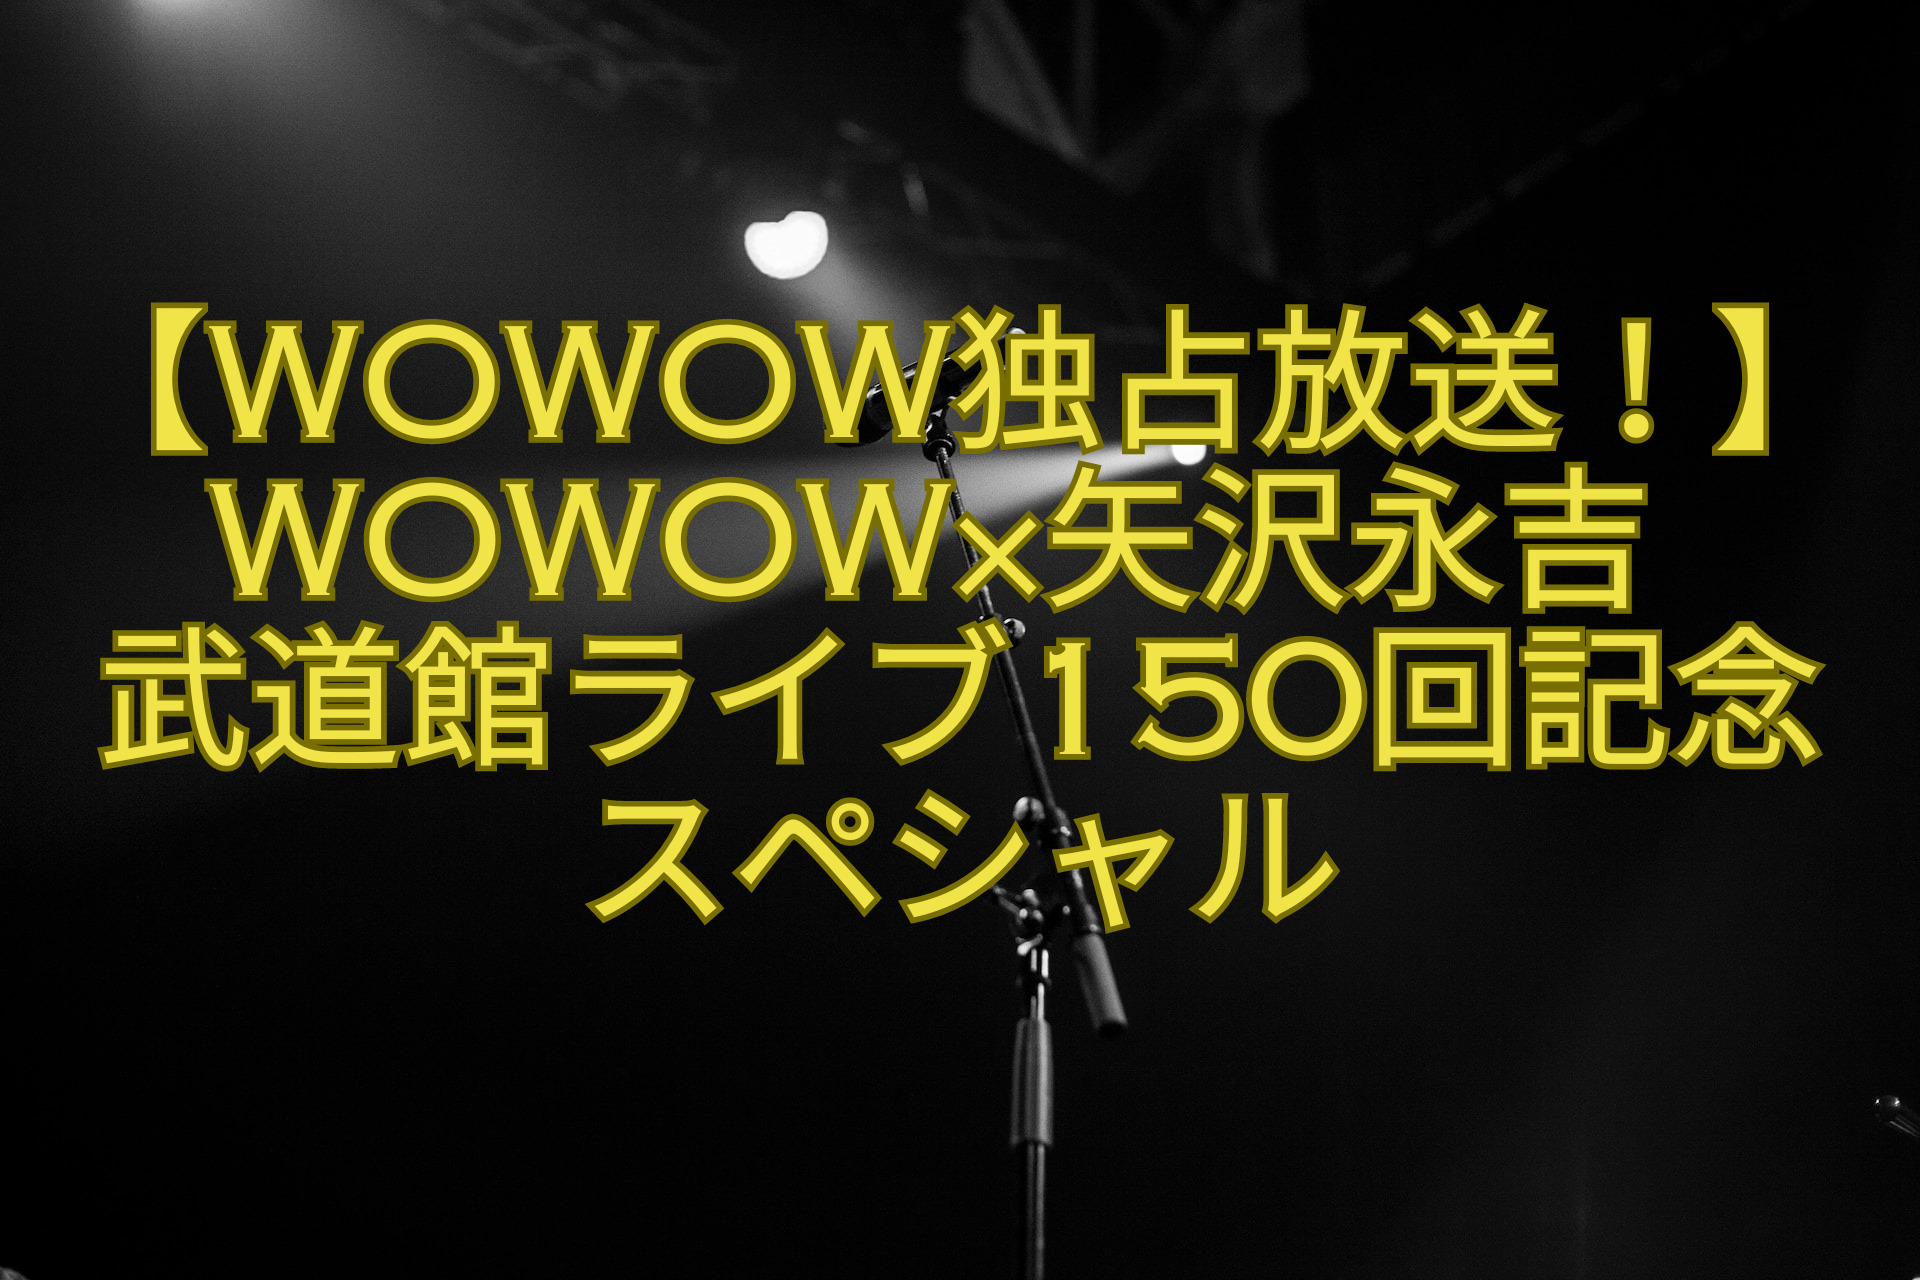 【WOWOW独占放送！】WOWOW×矢沢永吉-武道館ライブ150回記念スペシャル